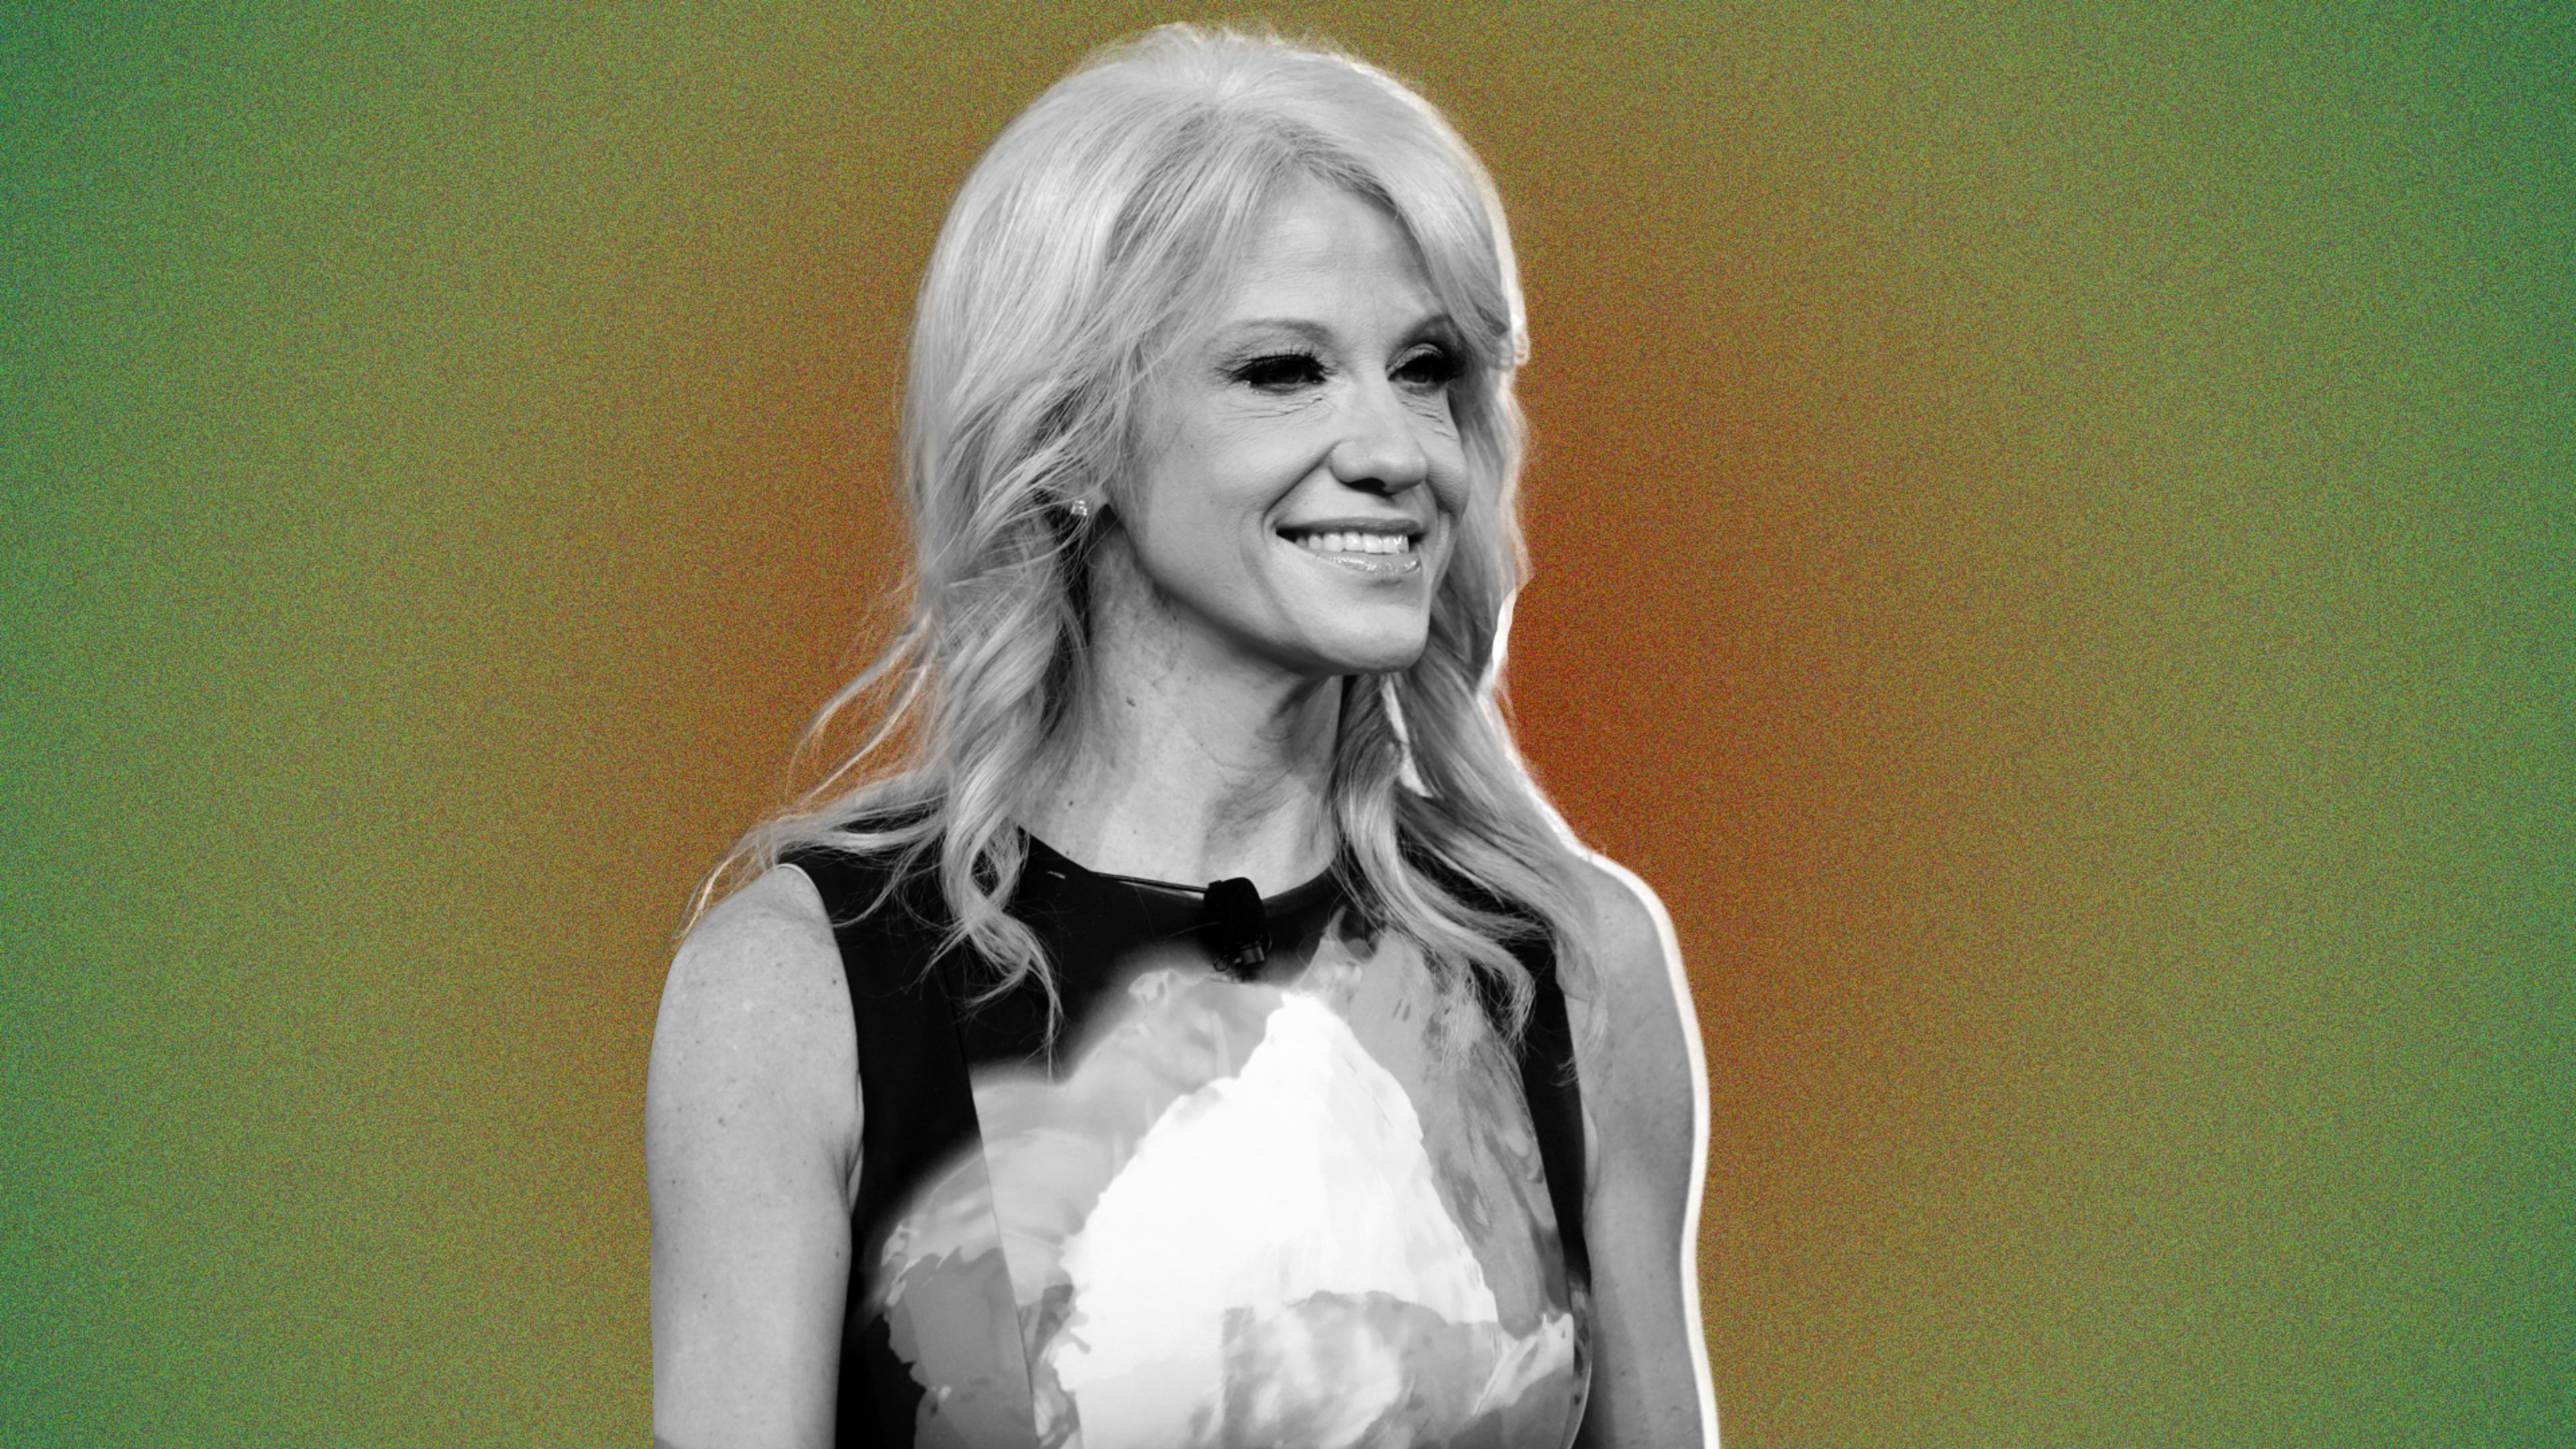 Government office calls for Kellyanne Conway’s removal in an unprecedented move